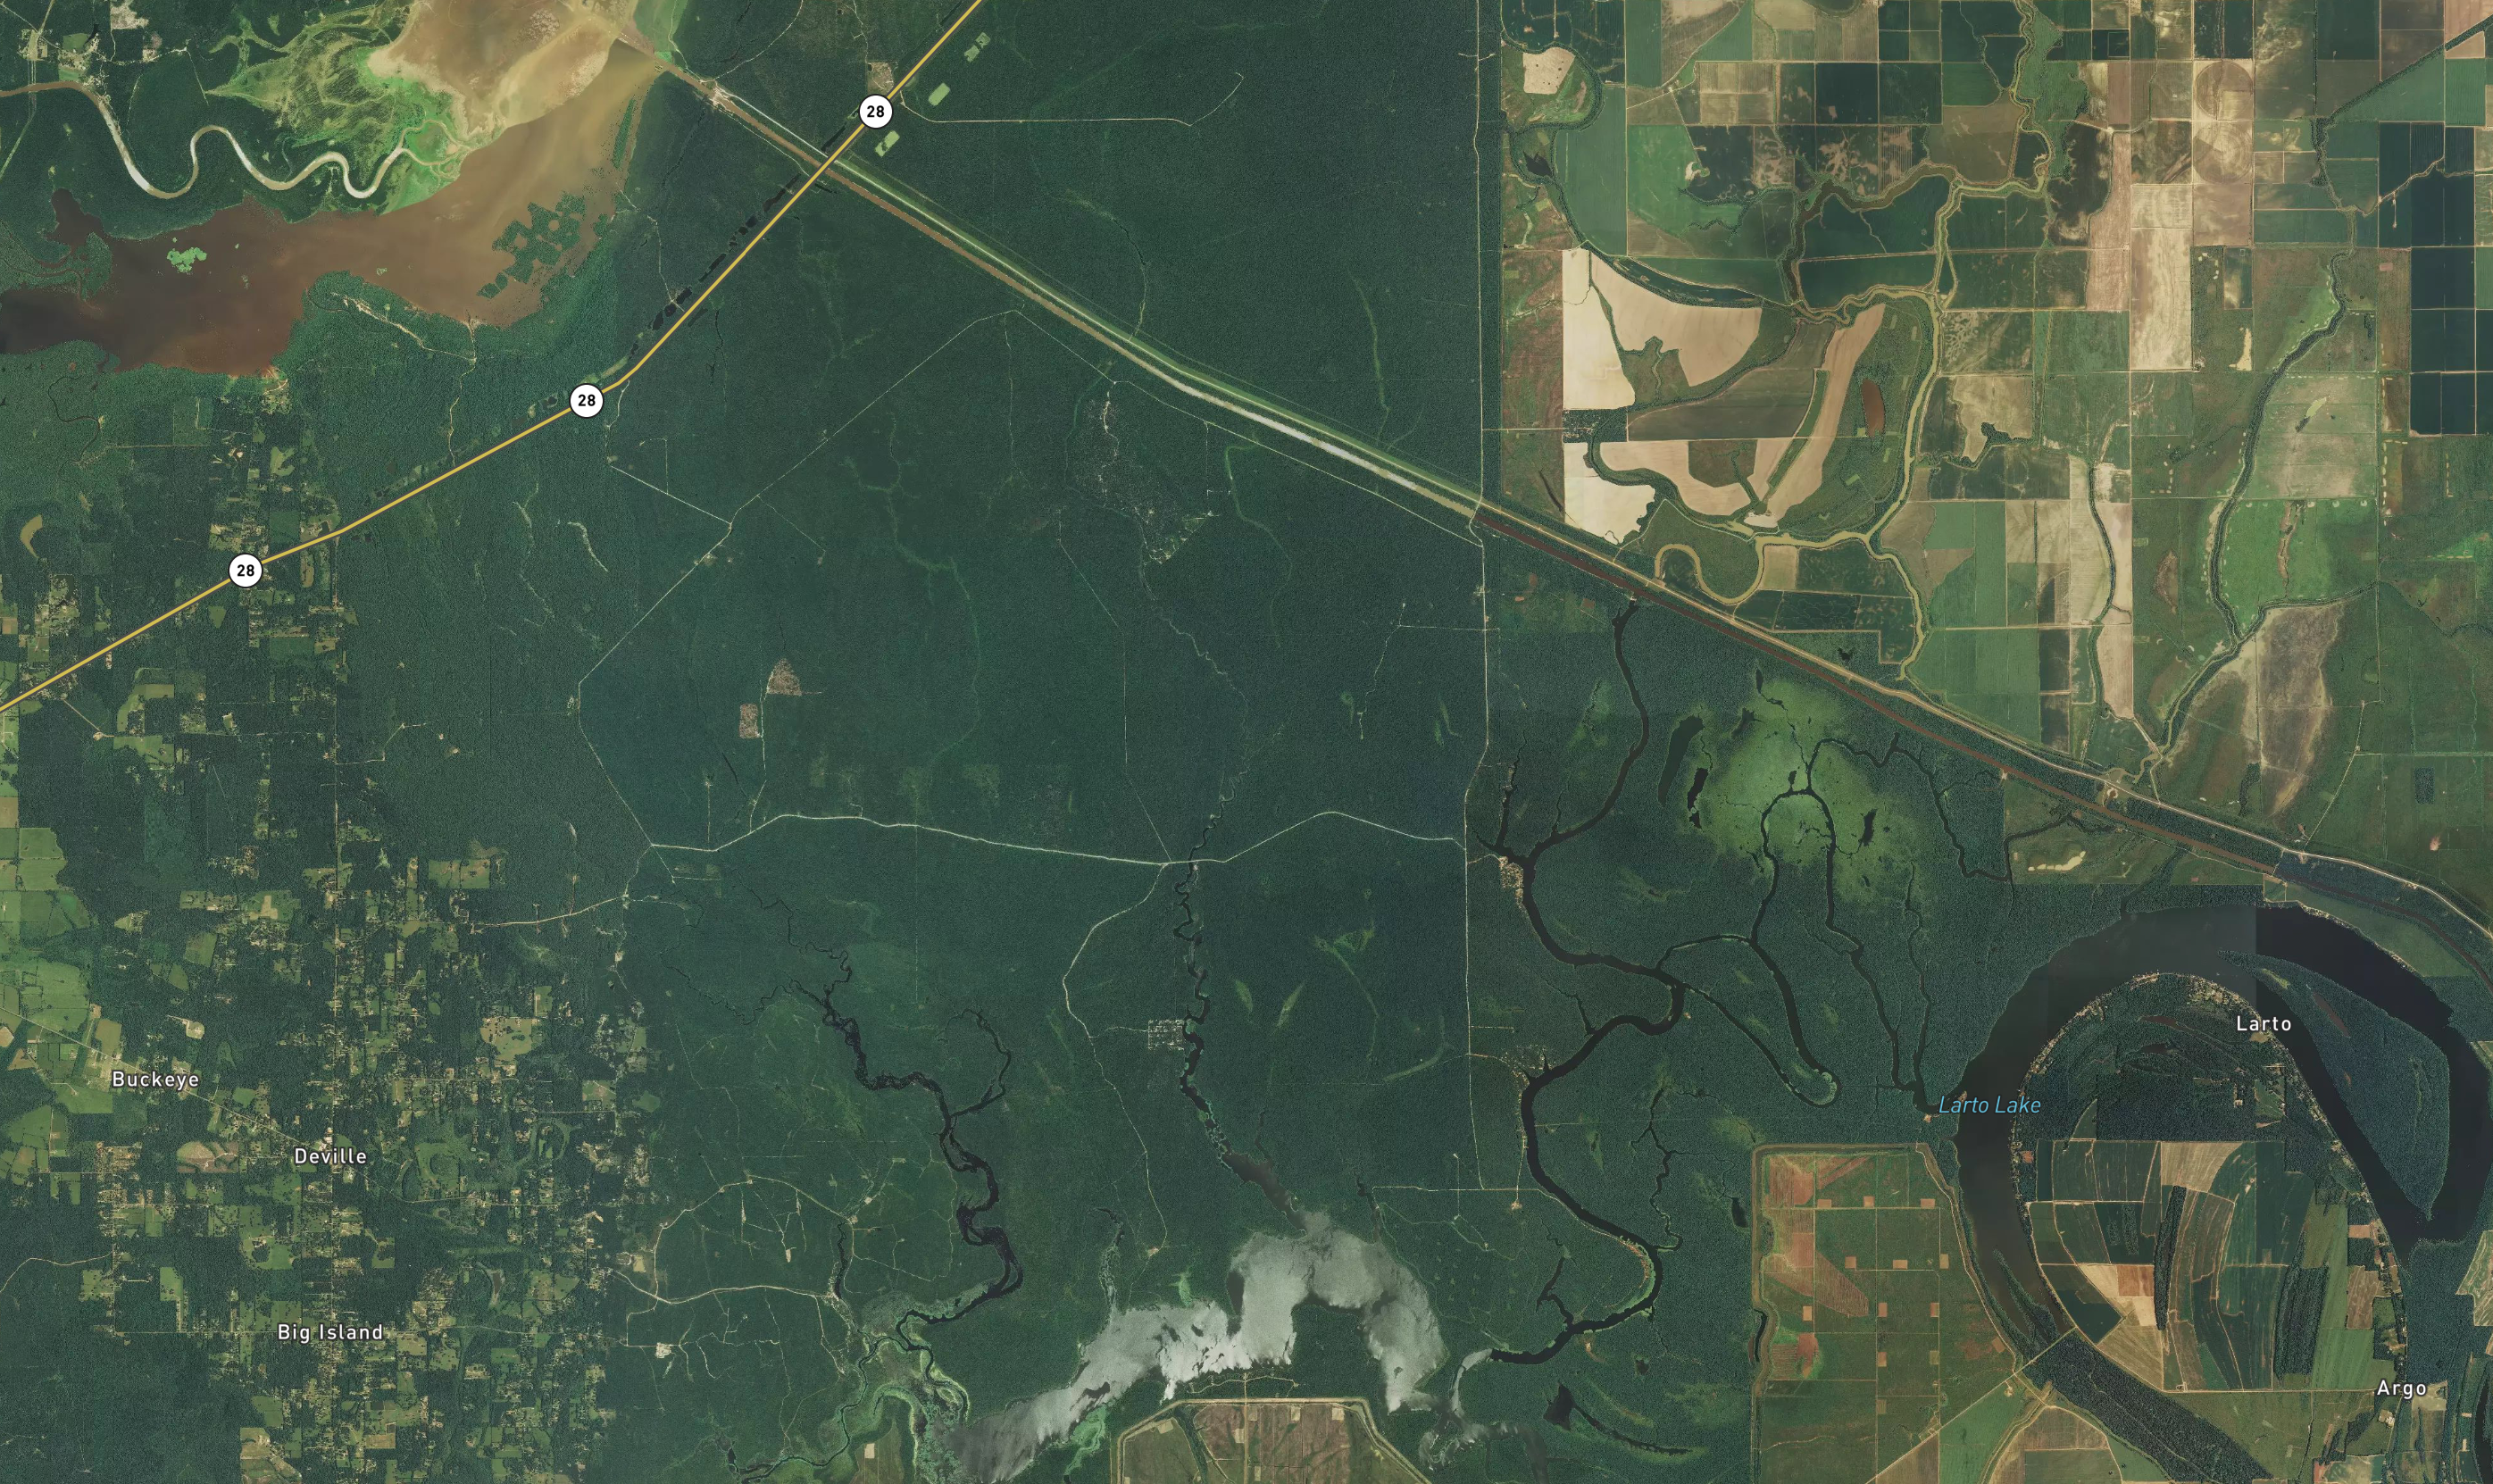 This area is also home to some of the best public hunting land in the state. High numbers of ducks are harvested every year and whitetail deer in the 200-inch class are killed. Here in Louisiana thatâs a big deer, one to be proud of taking.
<p>
The Saline Larto Complex is in a rural part of the state. Donât expect to find much other than fish camps, hunting camps and small restaurants.